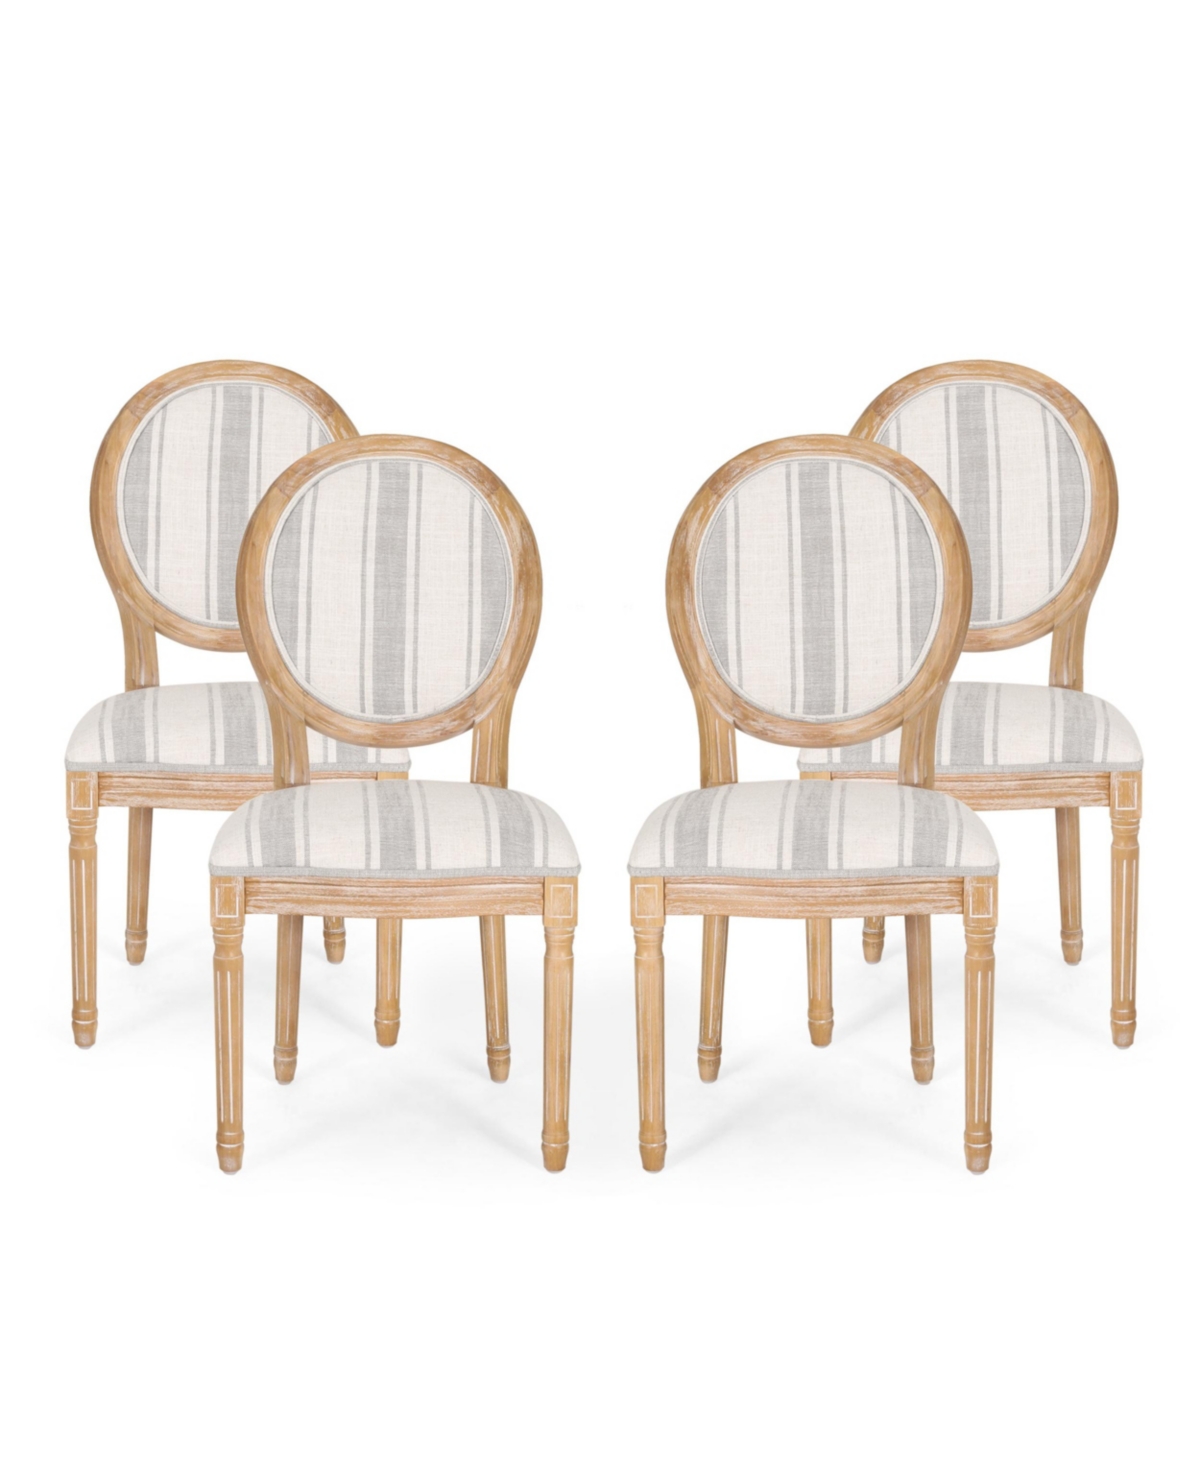 Noble House Phinnaeus French Country Dining Chairs Set, 4 Piece In Gray Stripes And Light Beige